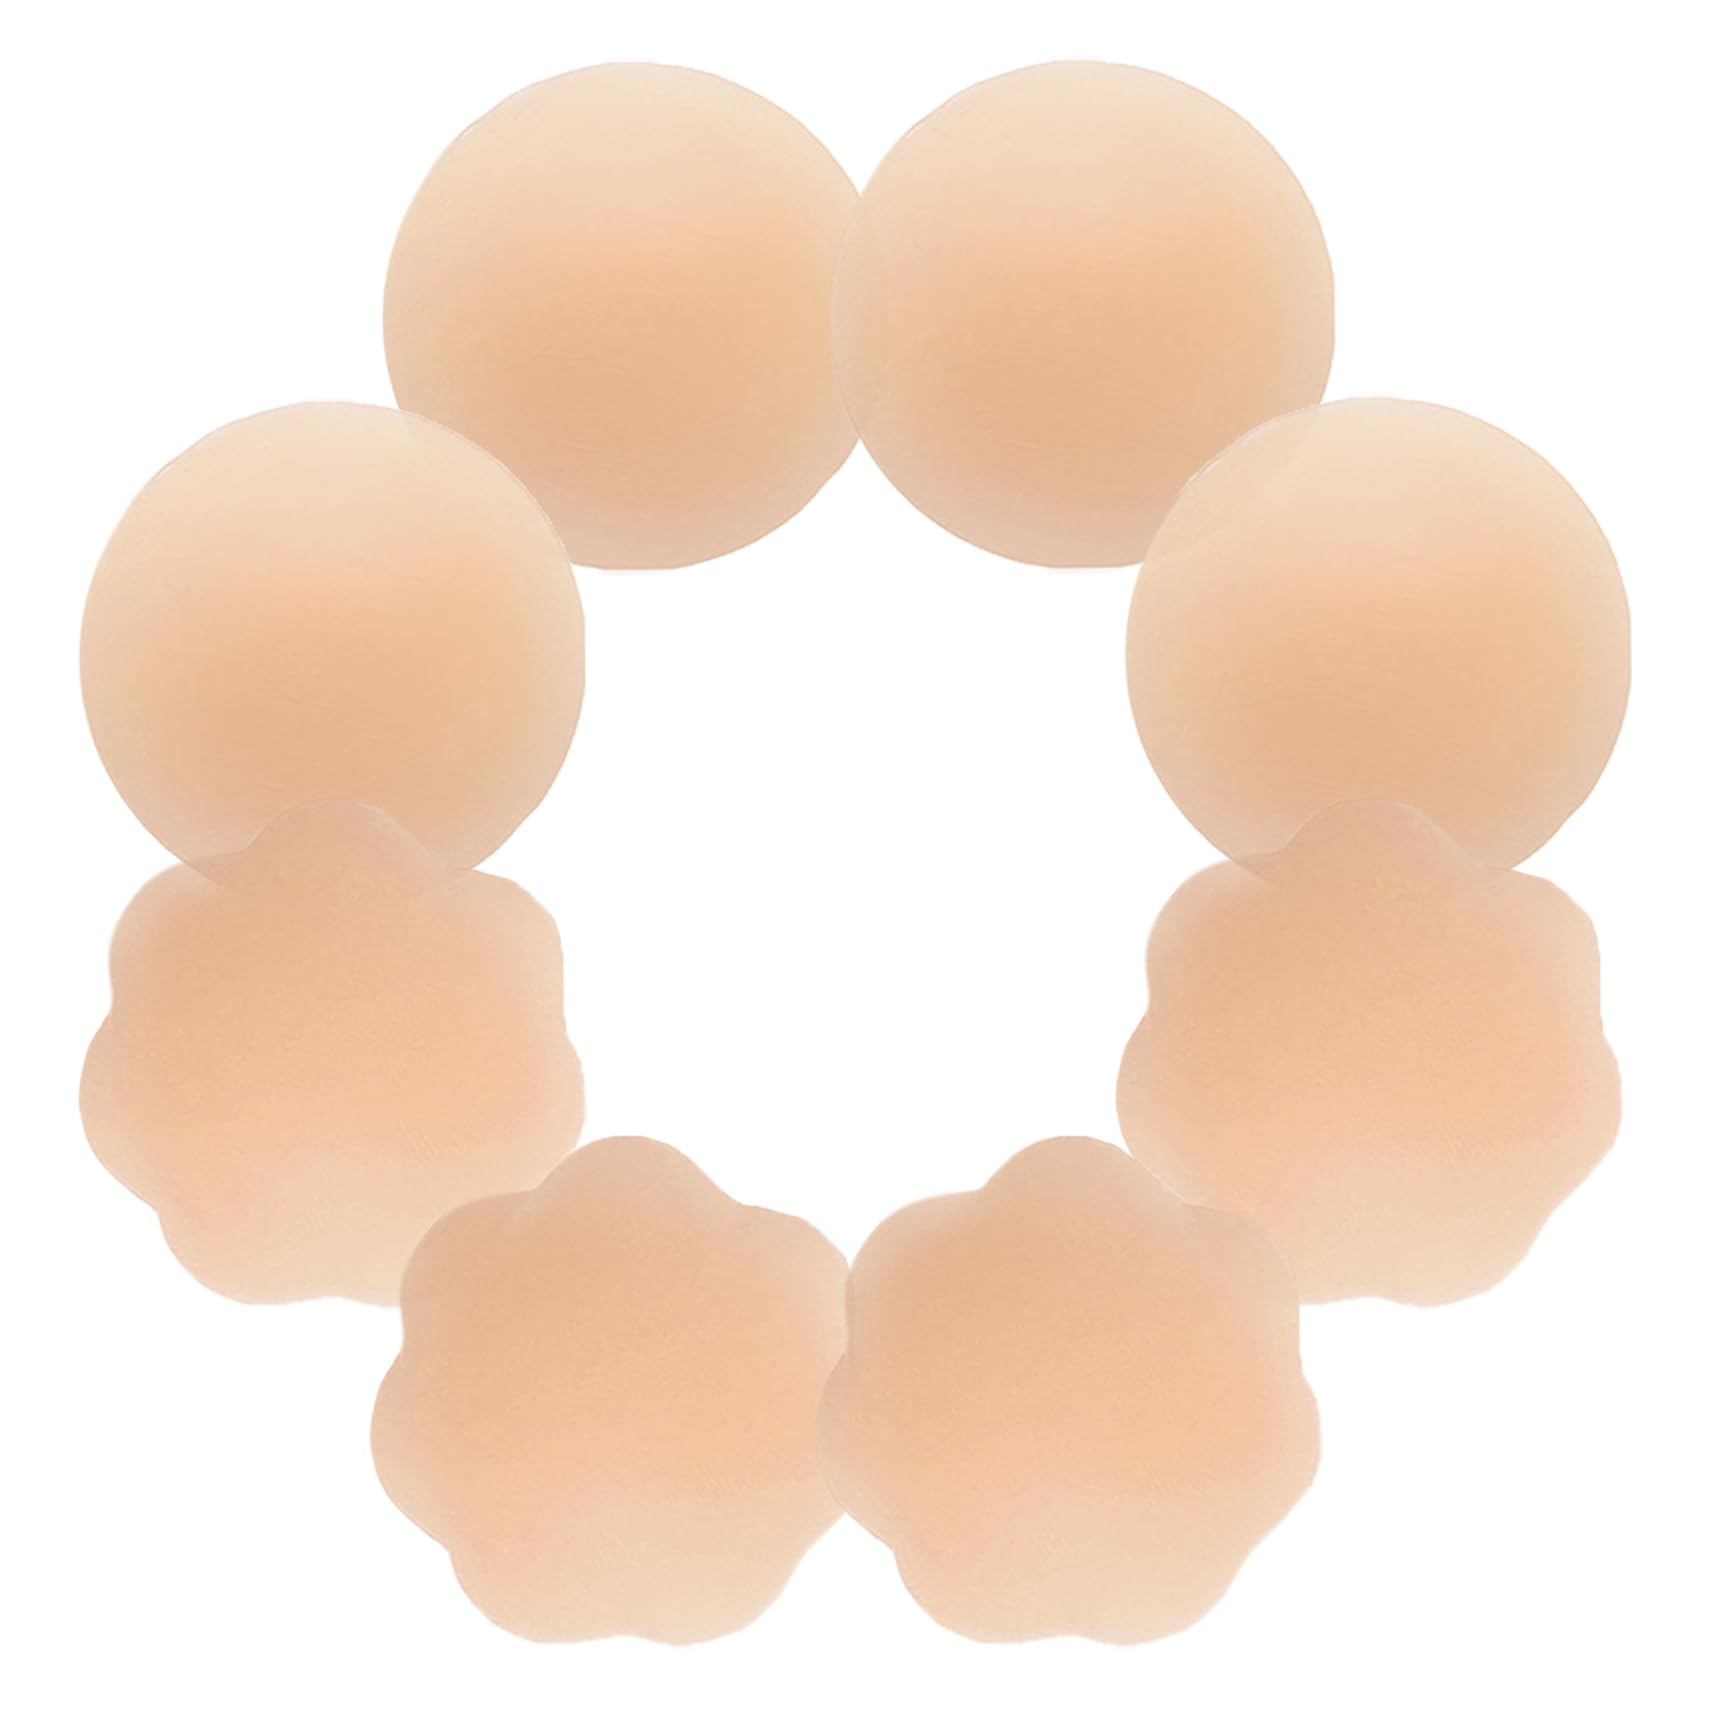 CHARMKING Nipple Covers 4 Pairs for Women, Reusable Adhesive Nipple Coverings, Invisible Pasties Silicone Cover